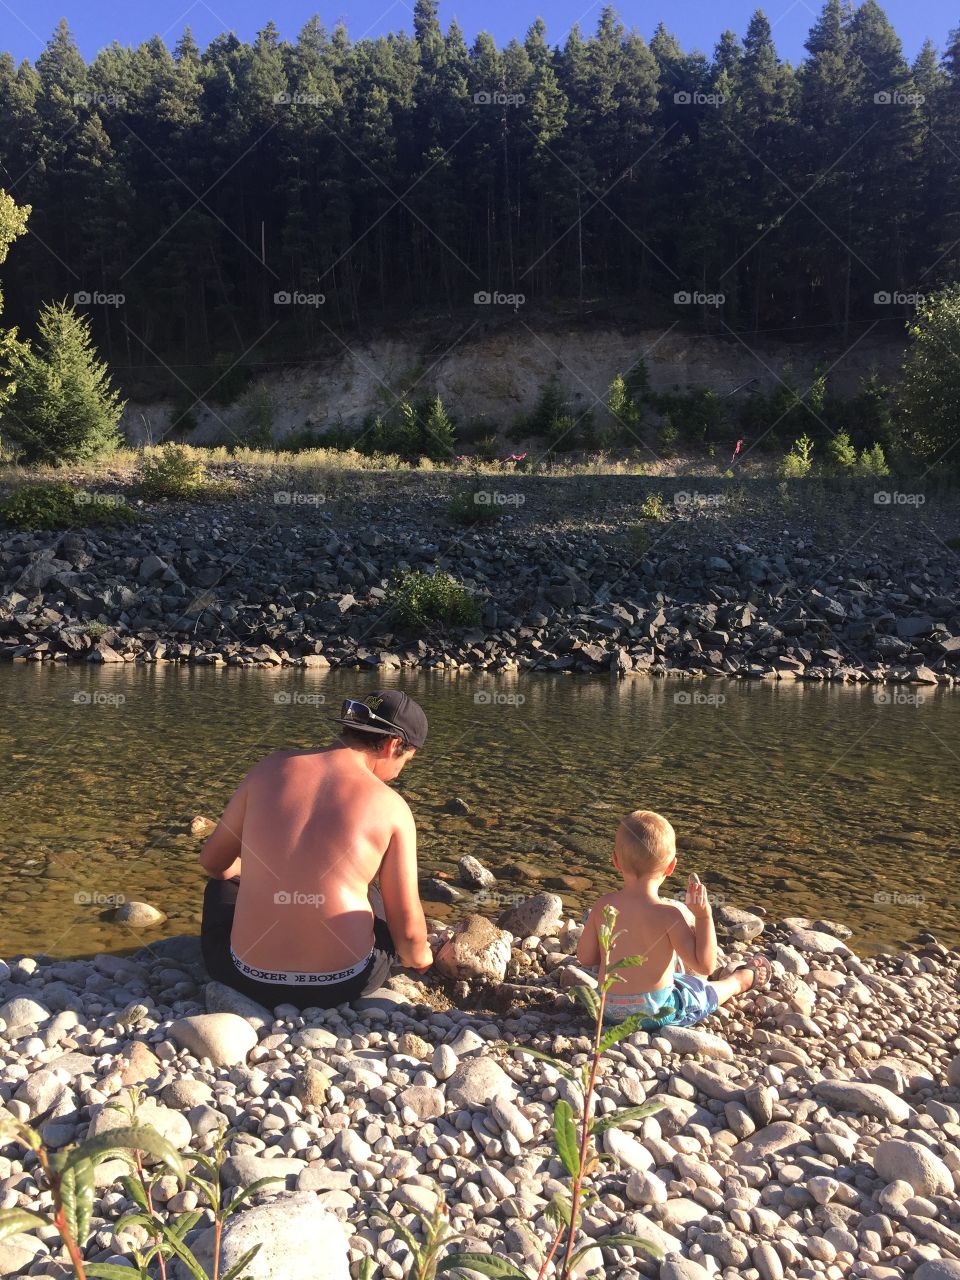 Boys throwing rocks in the river